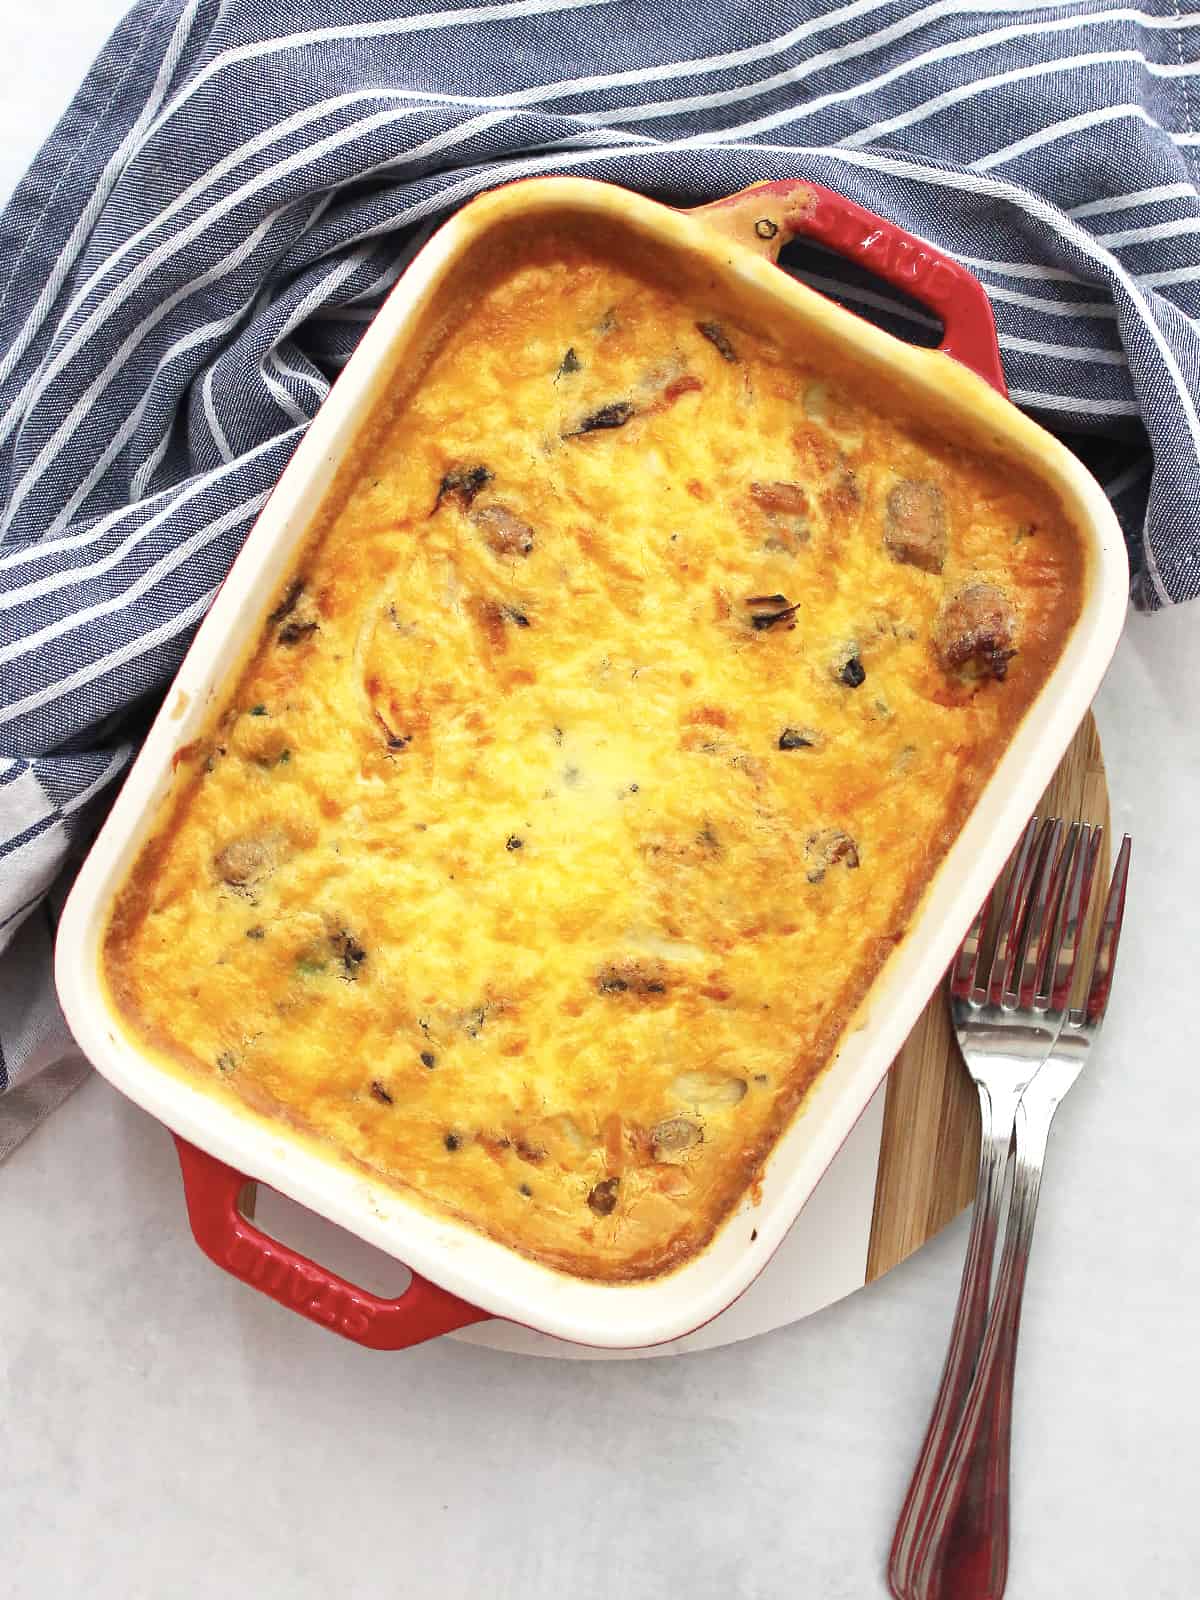 Air fryer sausage and egg breakfast casserole in a red baking dish ready to serve.